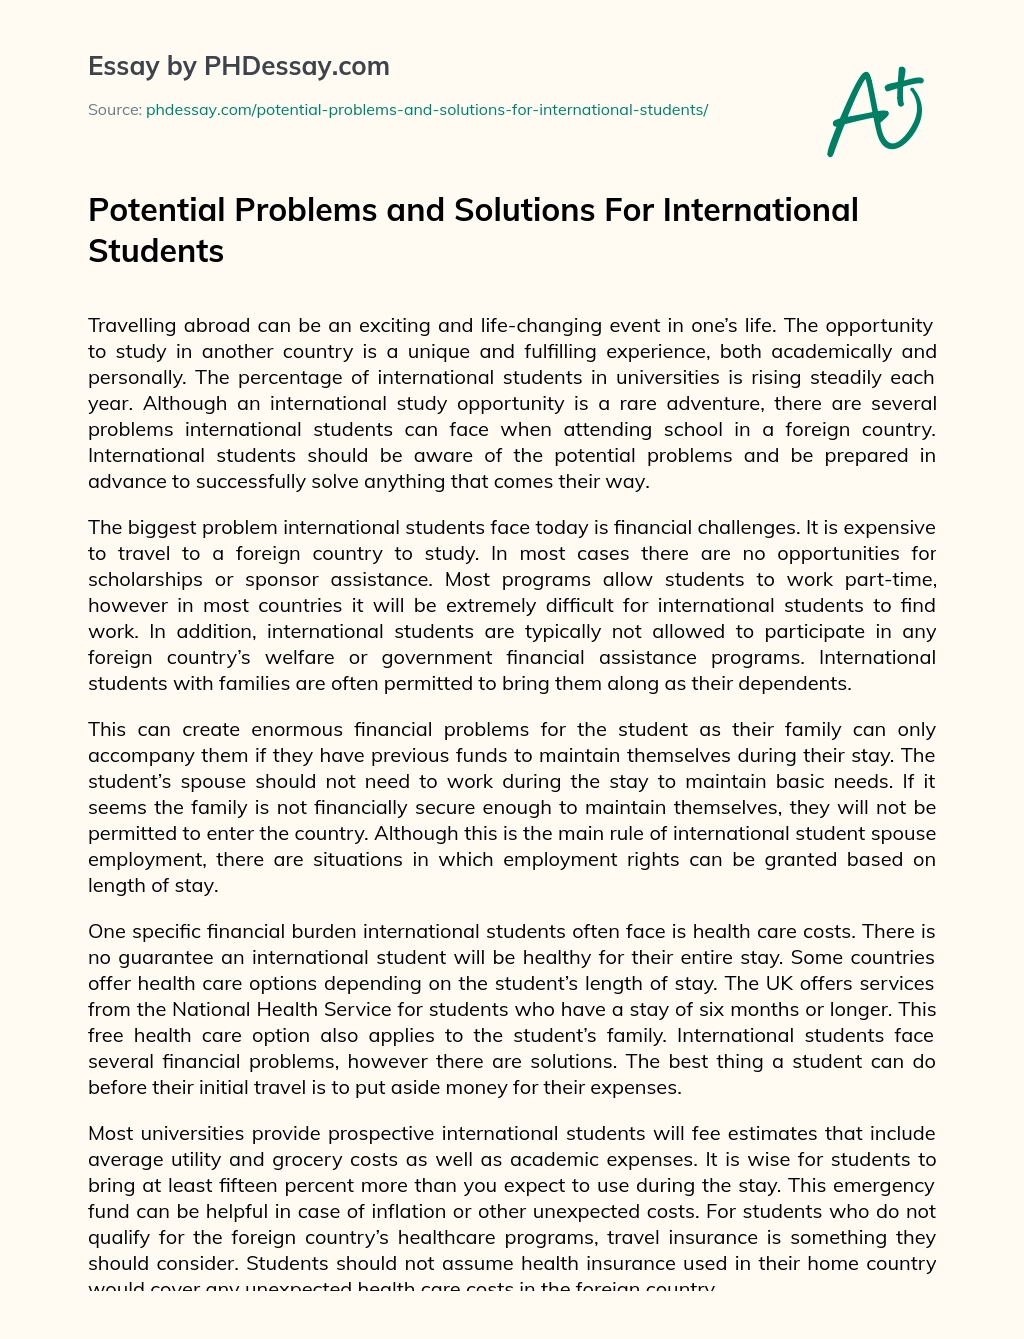 Potential Problems and Solutions For International Students essay